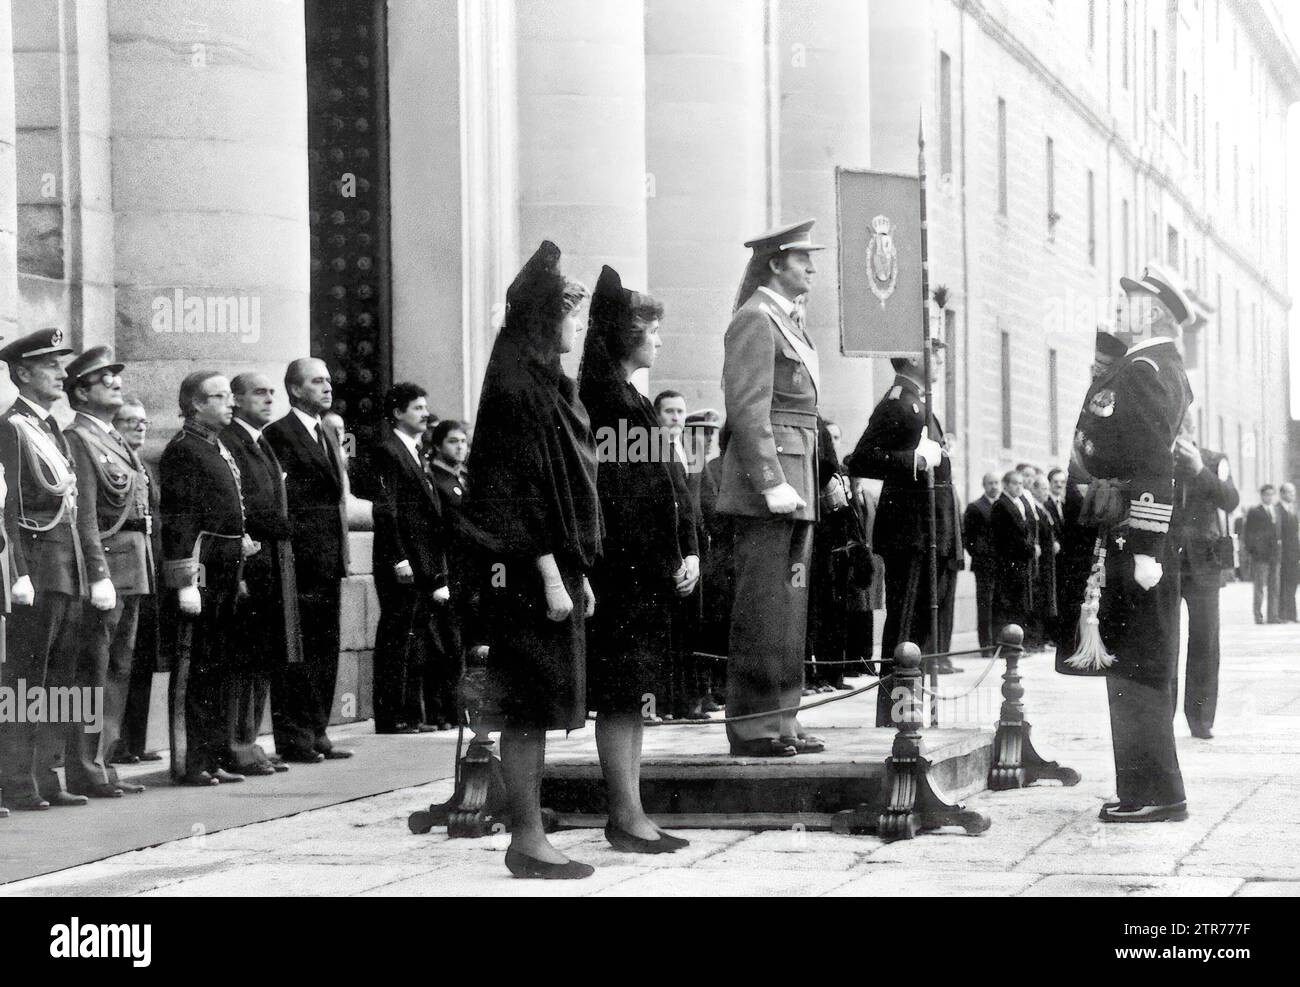 04/24/1985. The Kings at the monastery of El Escorial to preside over the funeral for Queen Victoria Eugenia. Don Juan de Borbón stands at attention before the King. Credit: Album / Archivo ABC / Jaime Pato Stock Photo